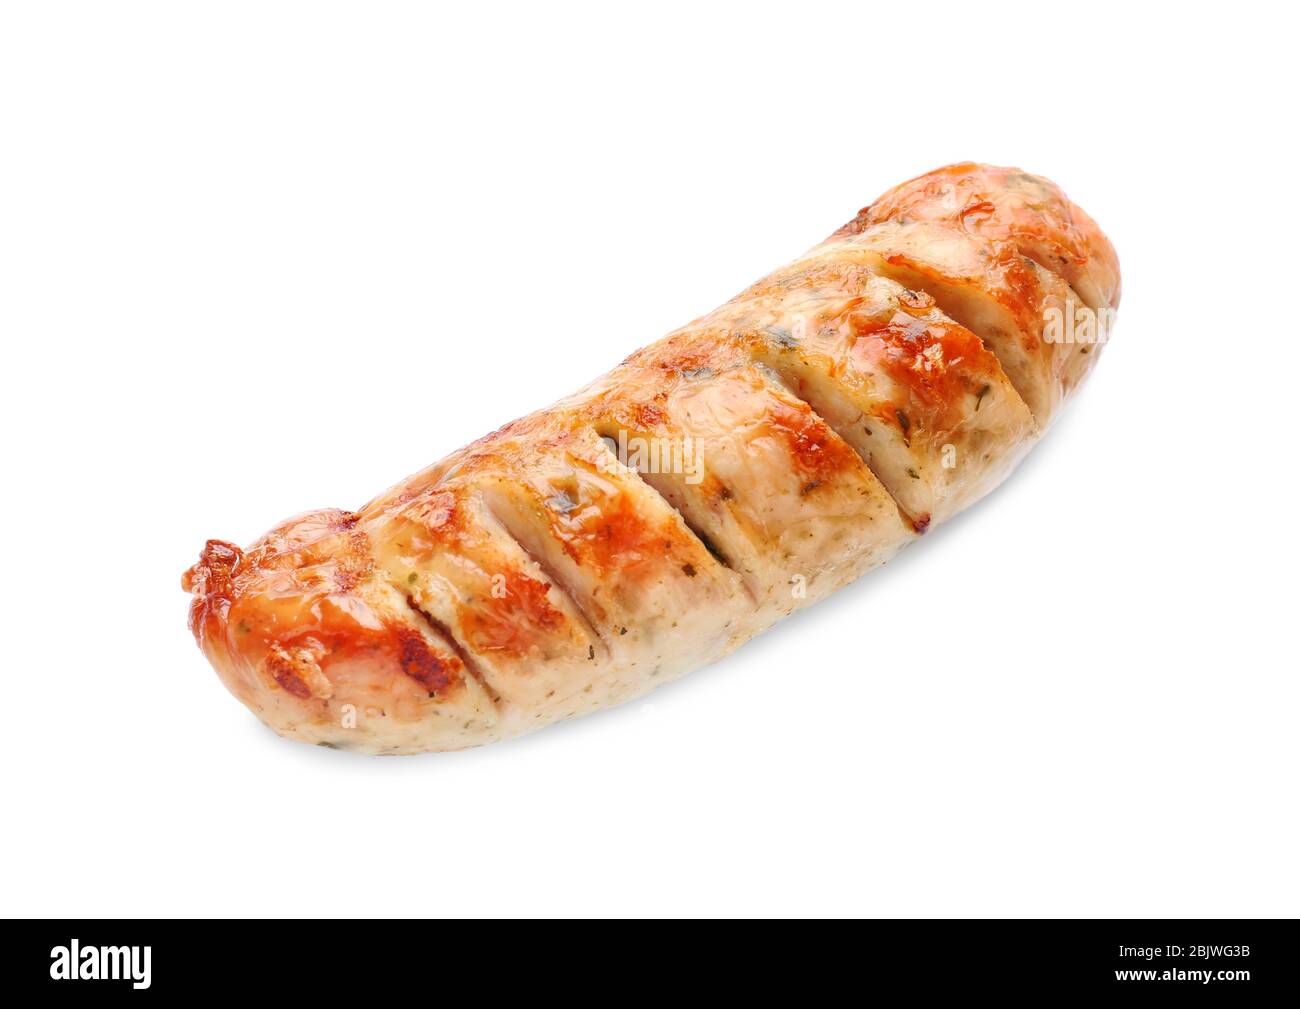 Delicious grilled sausage on white background Stock Photo